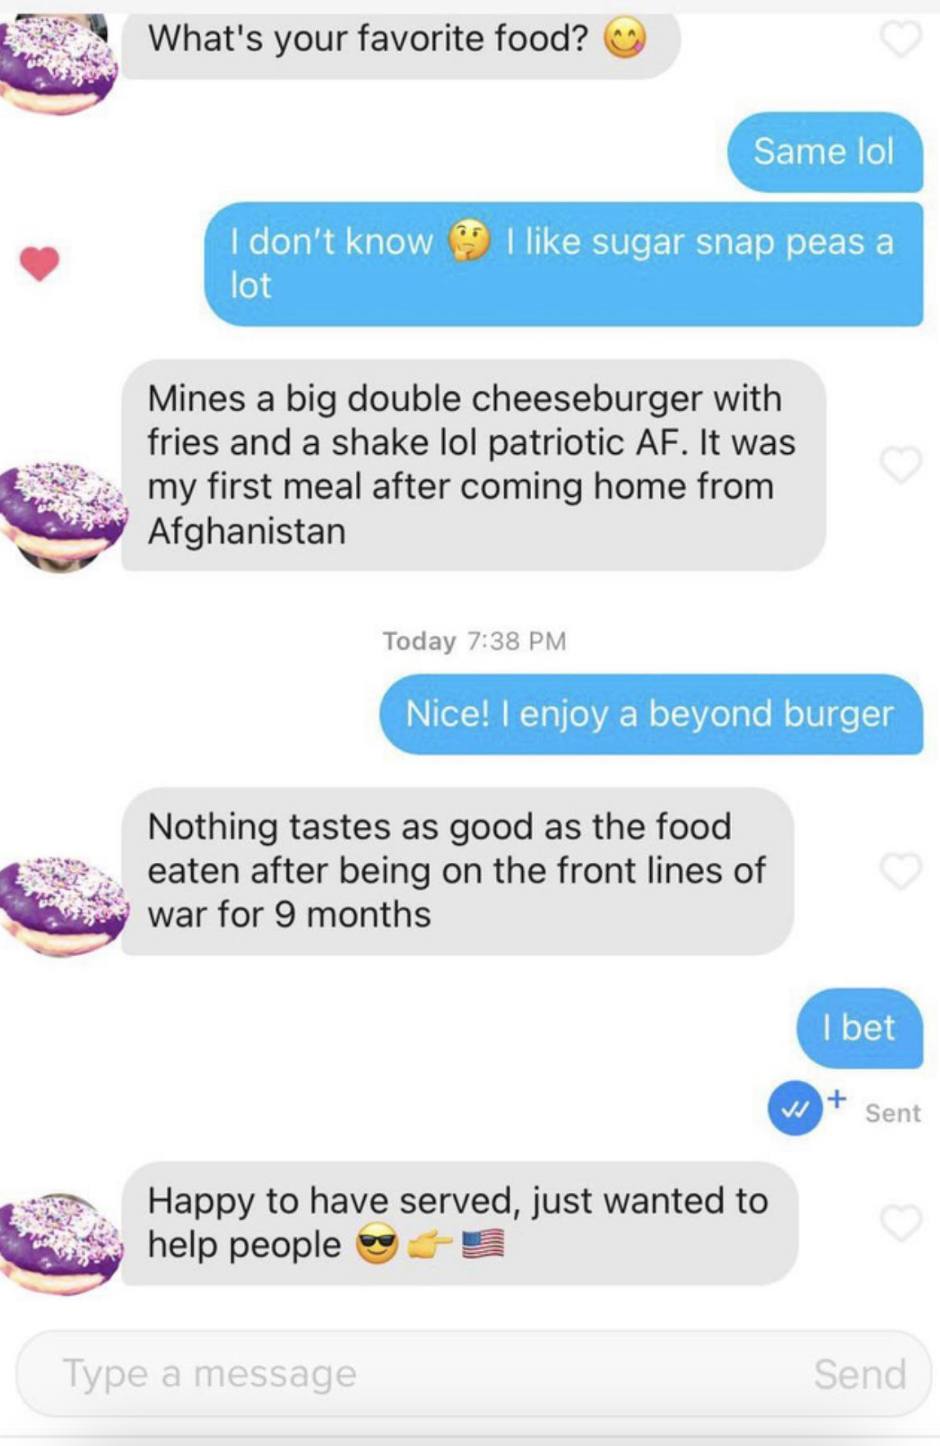 Someone asks what the other person&#x27;s favorite food is, then for the rest of the conversation ties every response back to the fact they served in the military